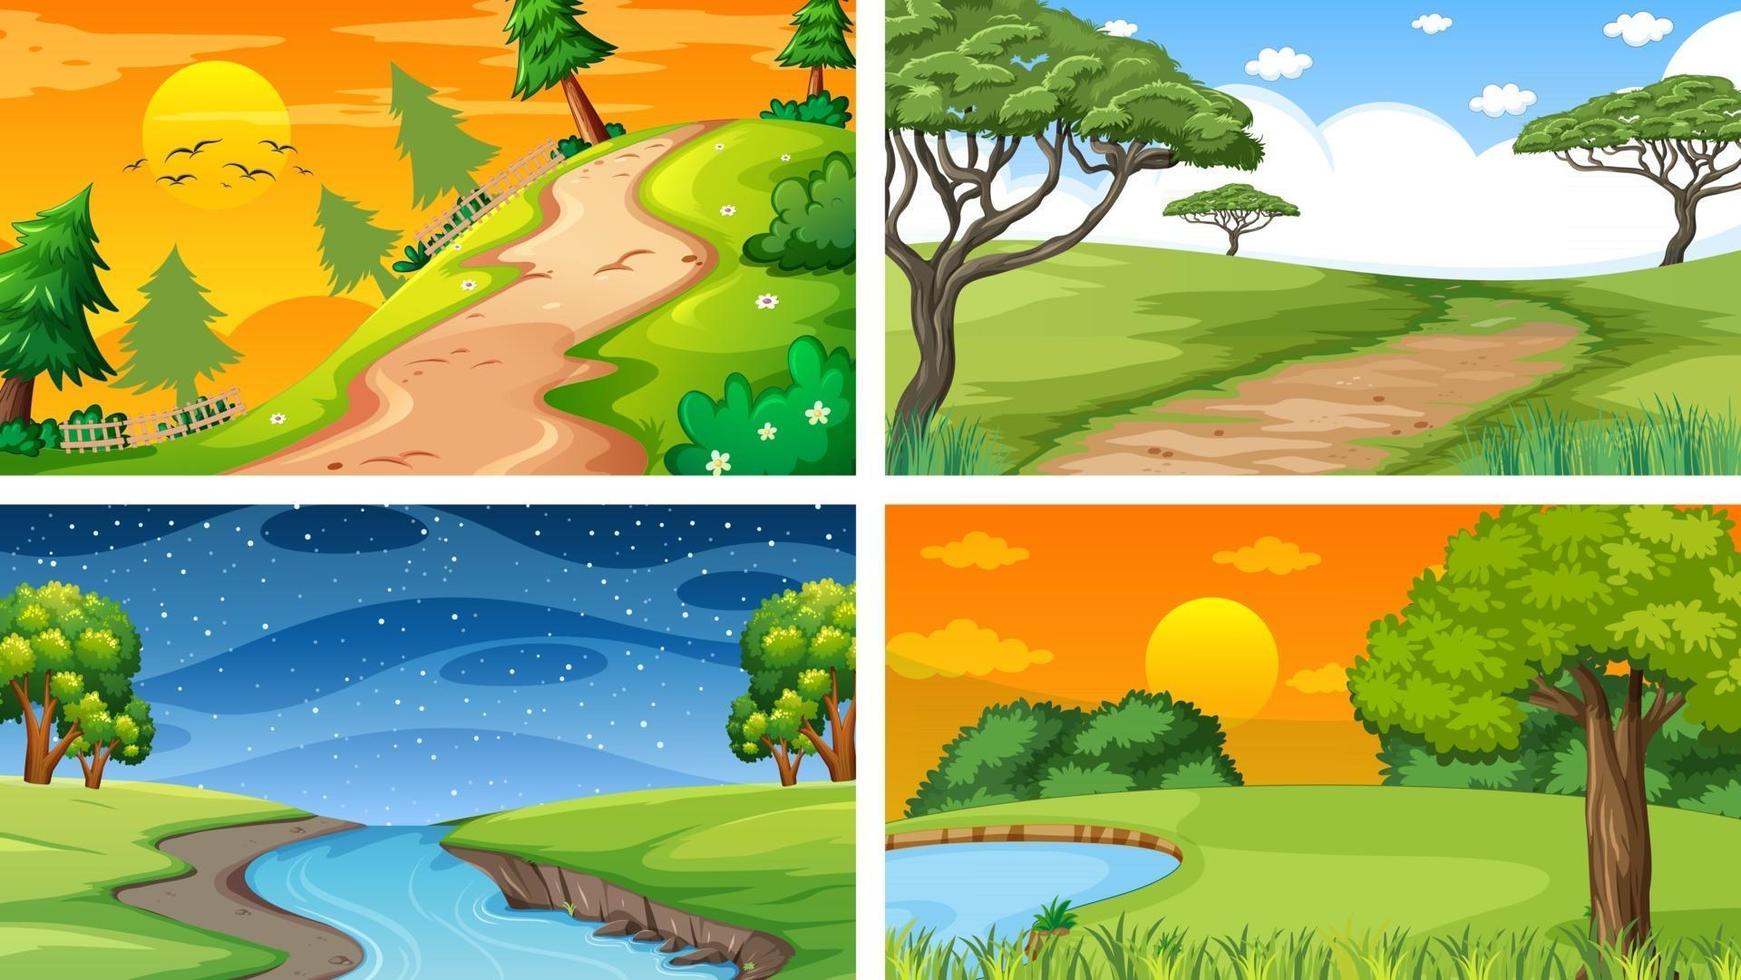 Four different scene of nature park and forest vector